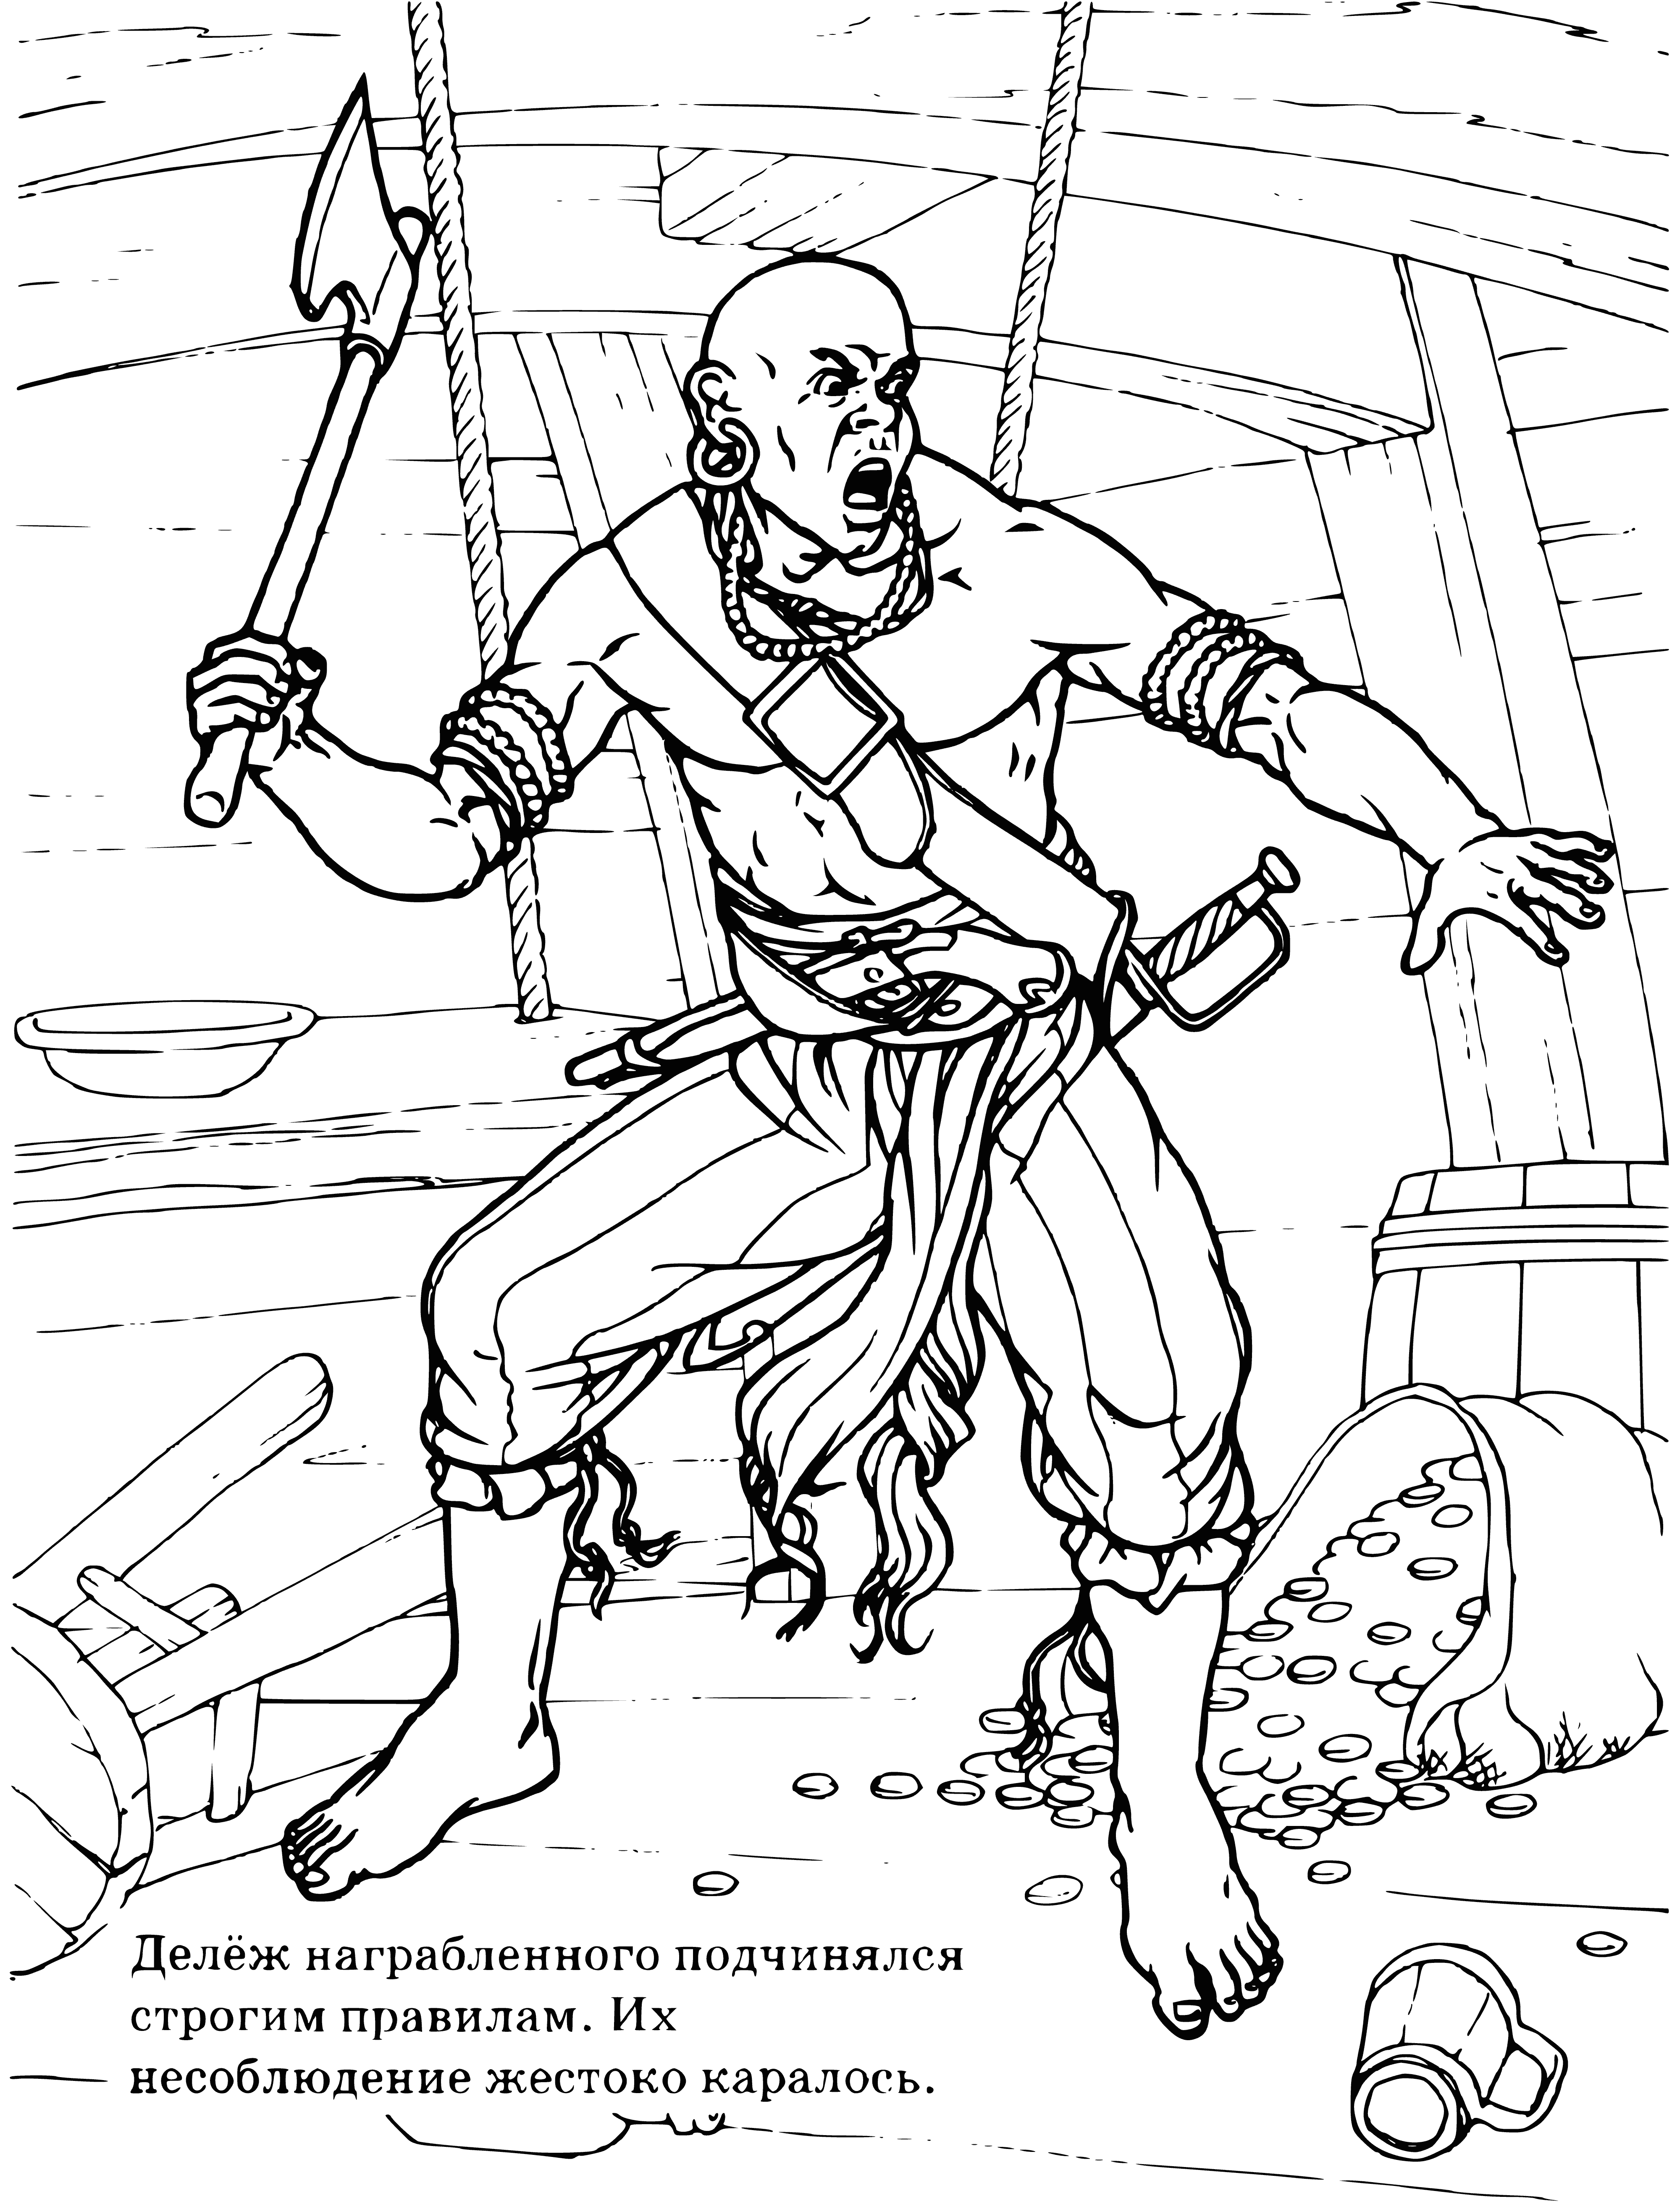 coloring page: The pirate wears an eye patch, has a peg leg and a scar on his cheek. He has a beard, bandana, and an earring with a knife in its belt.